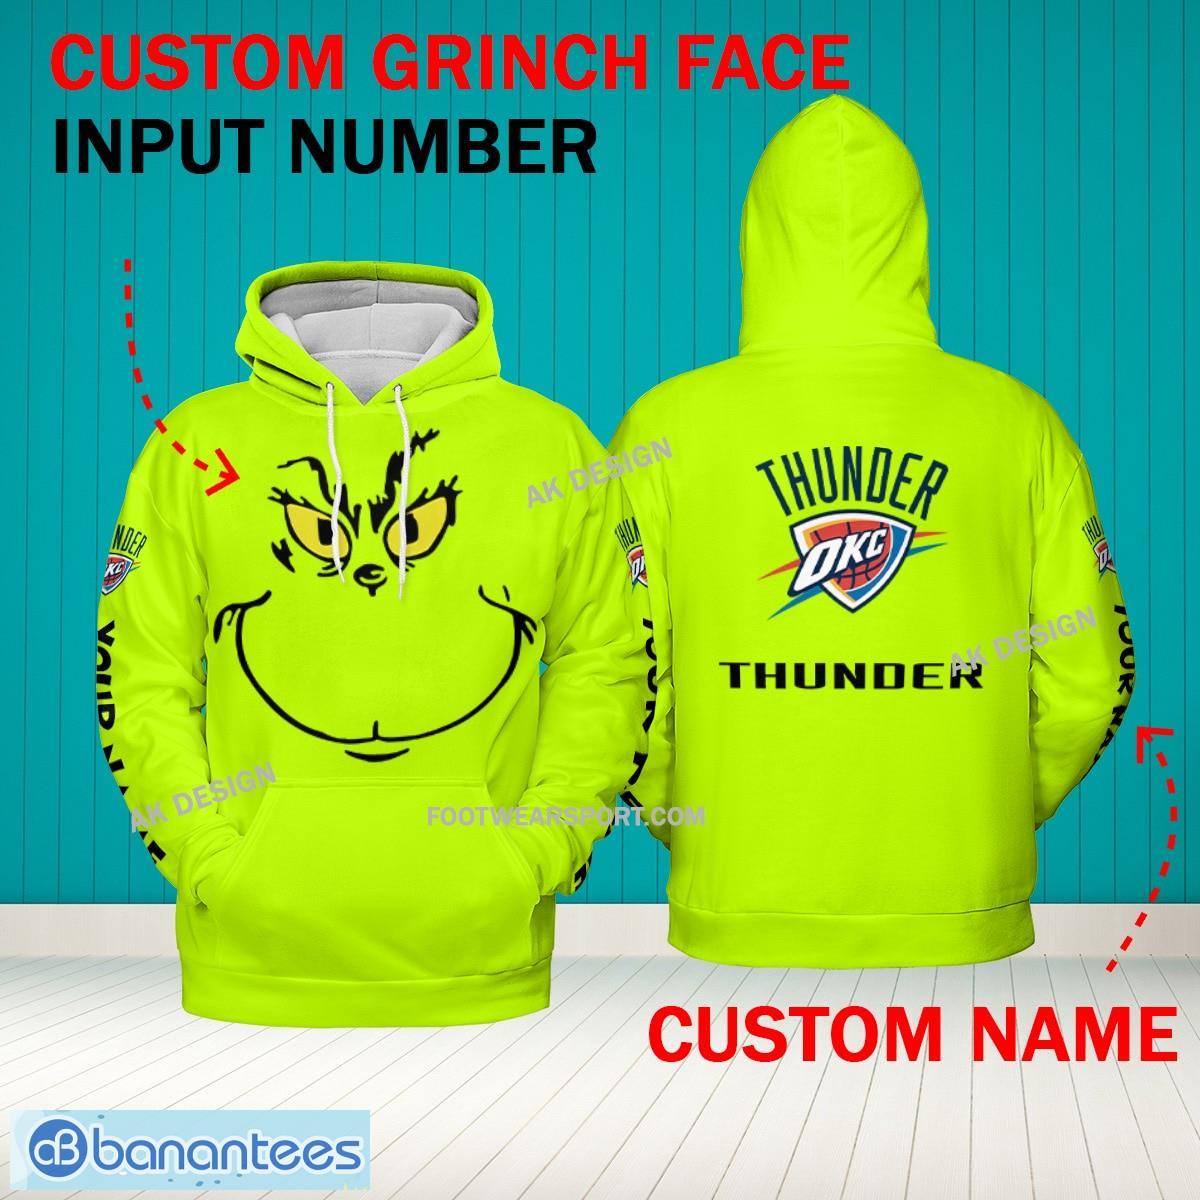 Grinch Face Oklahoma City Thunder 3D Hoodie, Zip Hoodie, Sweater Green AOP Custom Number And Name - Grinch Face NBA Oklahoma City Thunder 3D Hoodie